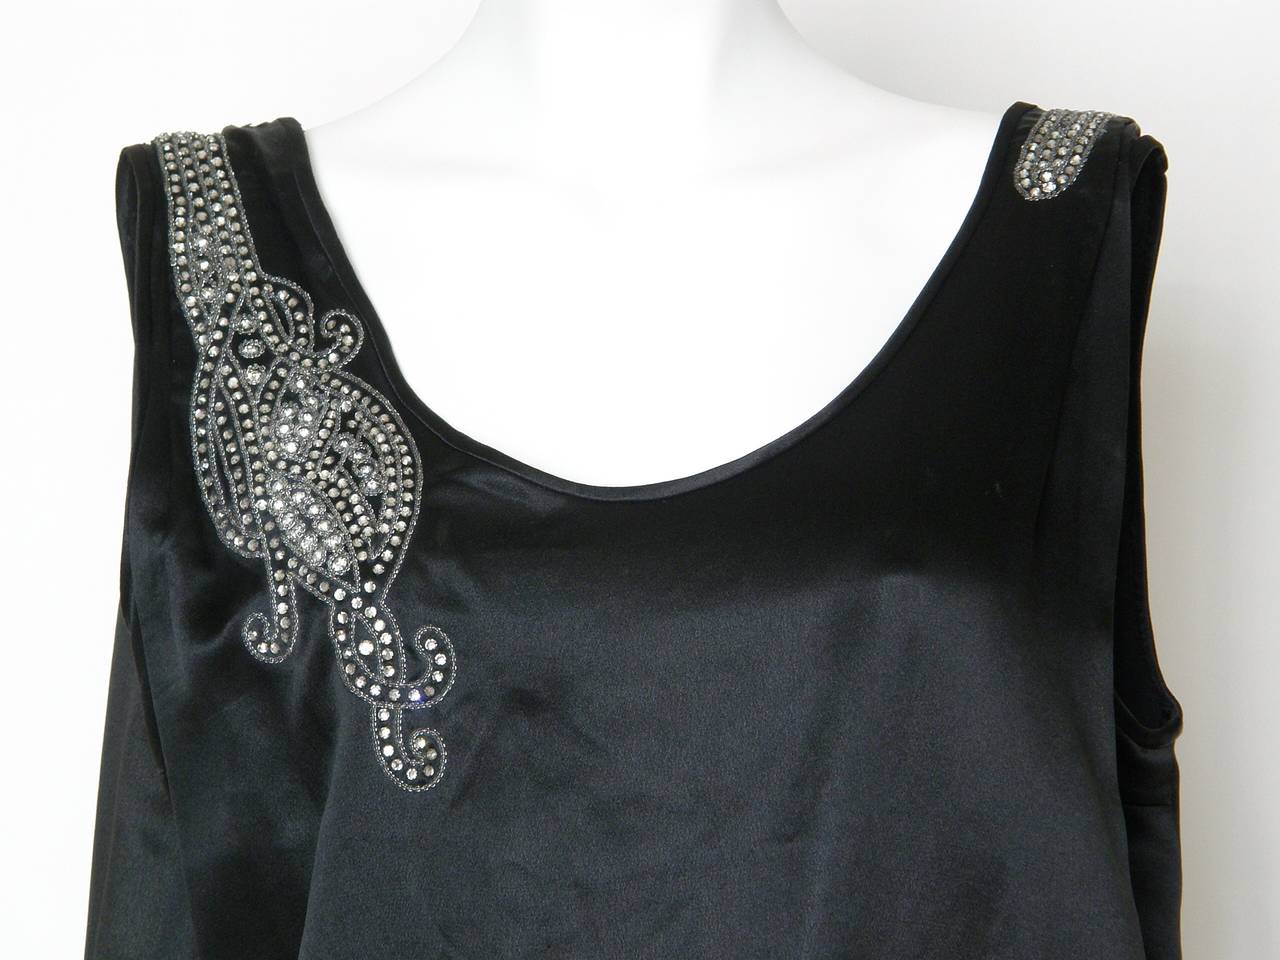 Black Satin Art Deco Style Evening Blouse with Rhinestones and Beading In Good Condition For Sale In Chicago, IL